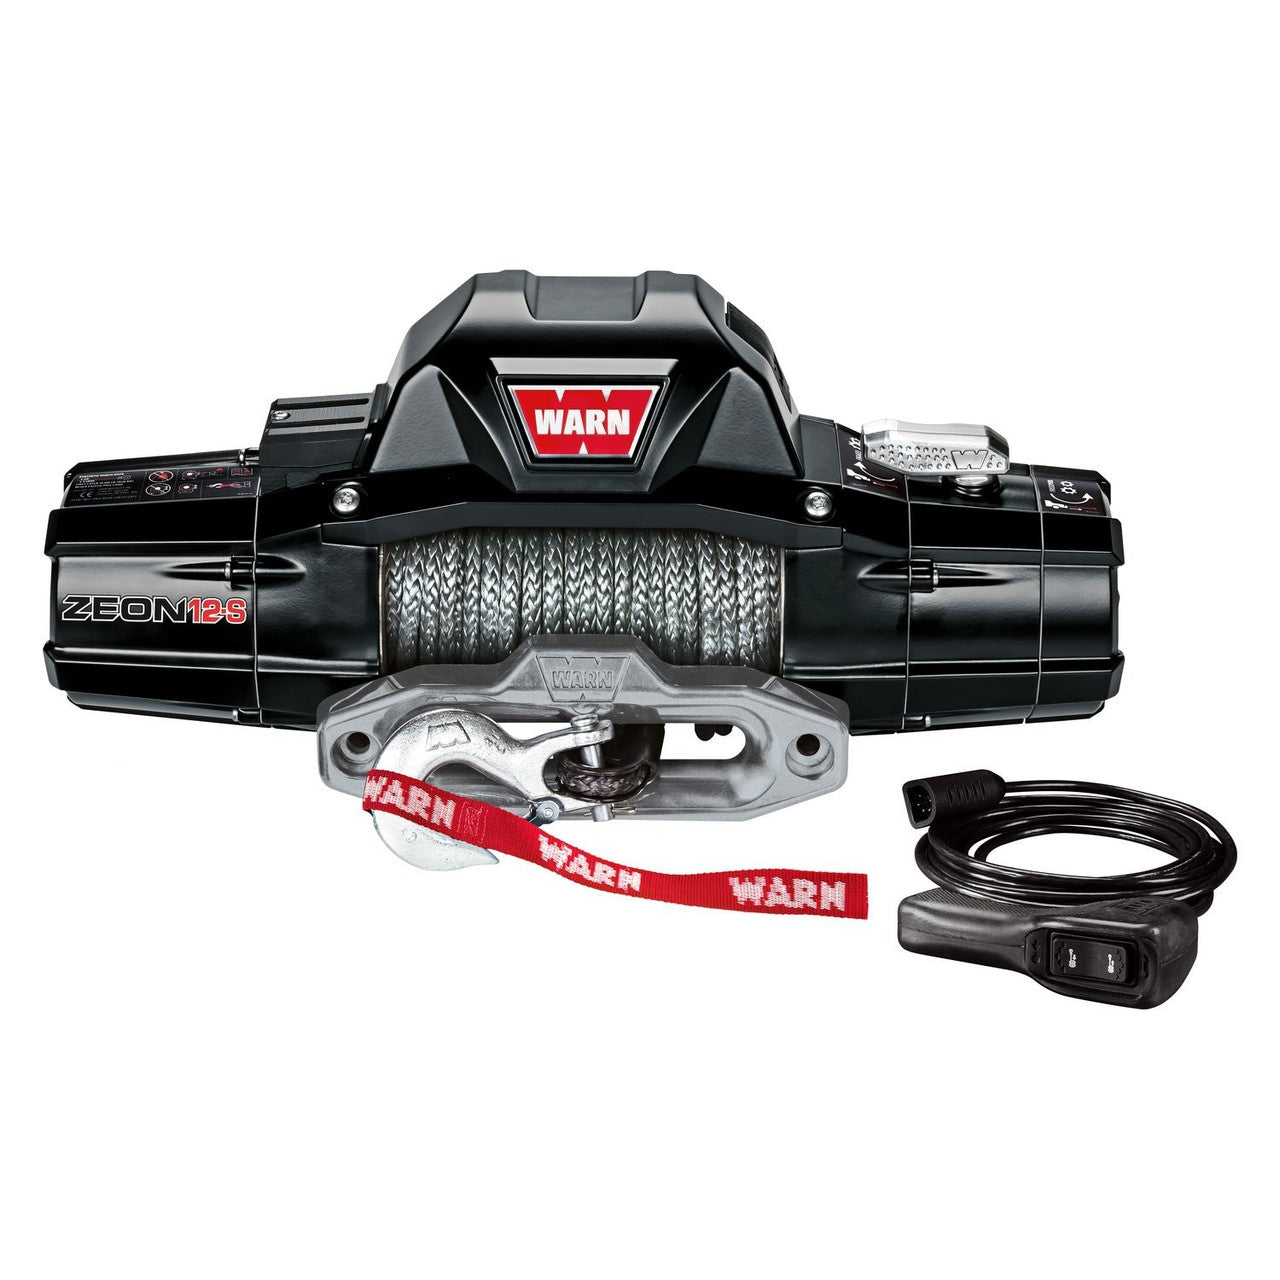 WARN ZEON 12-S 12,000lbs 12V Winch - Synthetic Rope